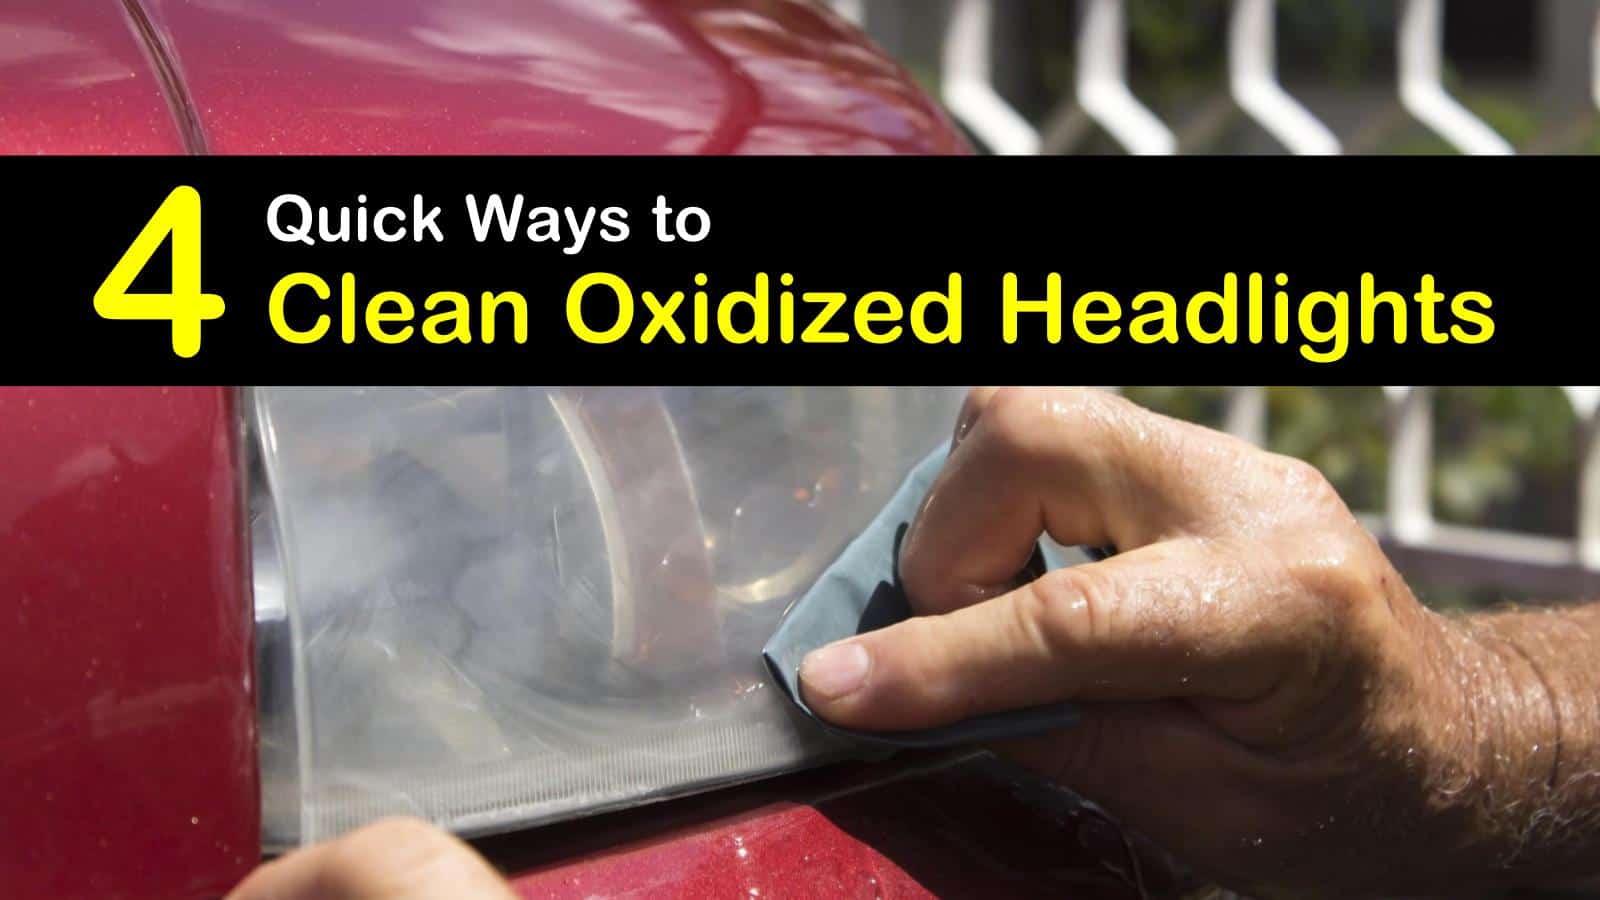 4 Quick Ways to Clean Oxidized Headlights